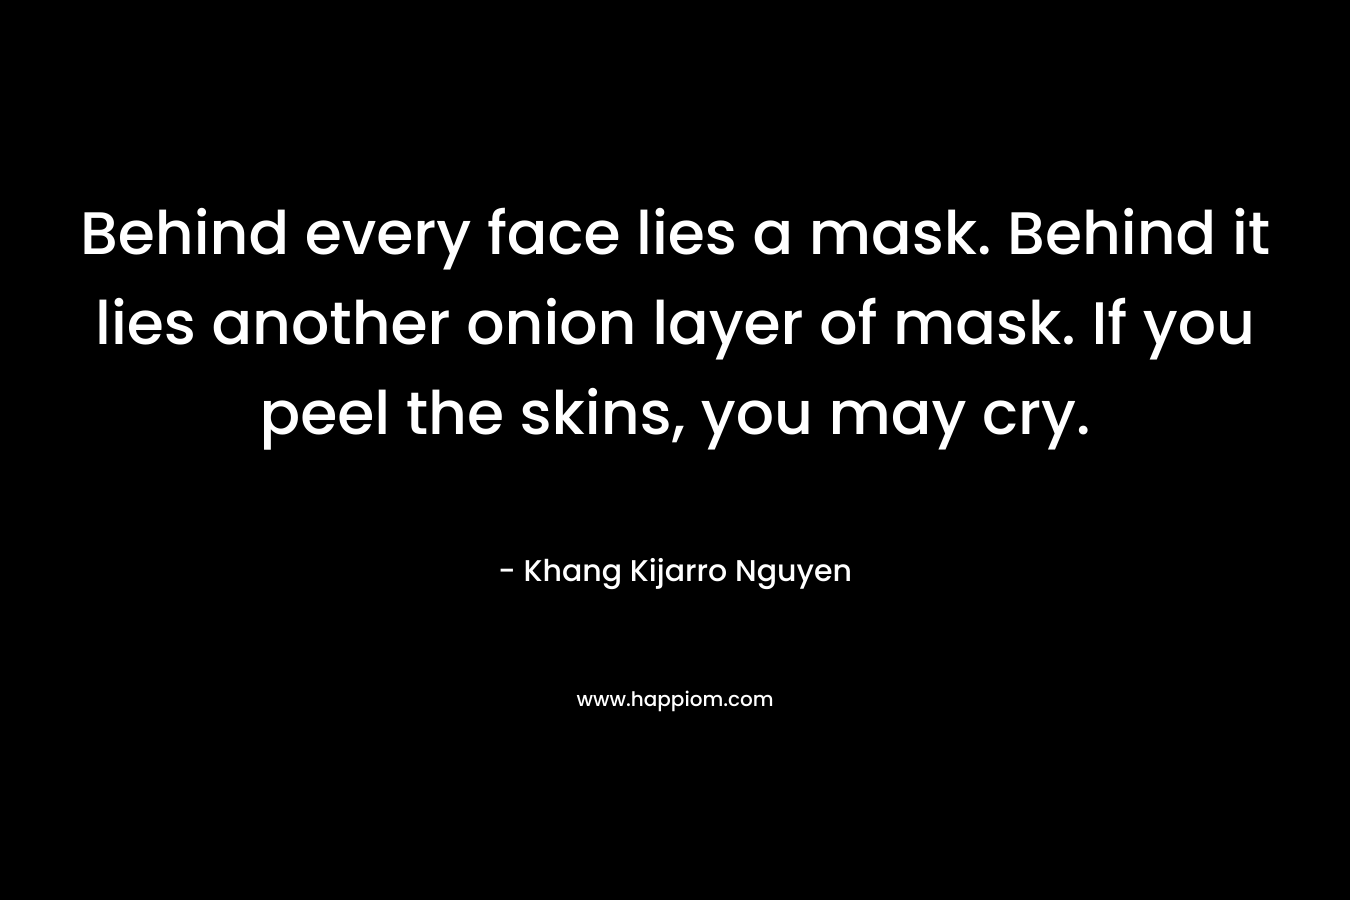 Behind every face lies a mask. Behind it lies another onion layer of mask. If you peel the skins, you may cry.